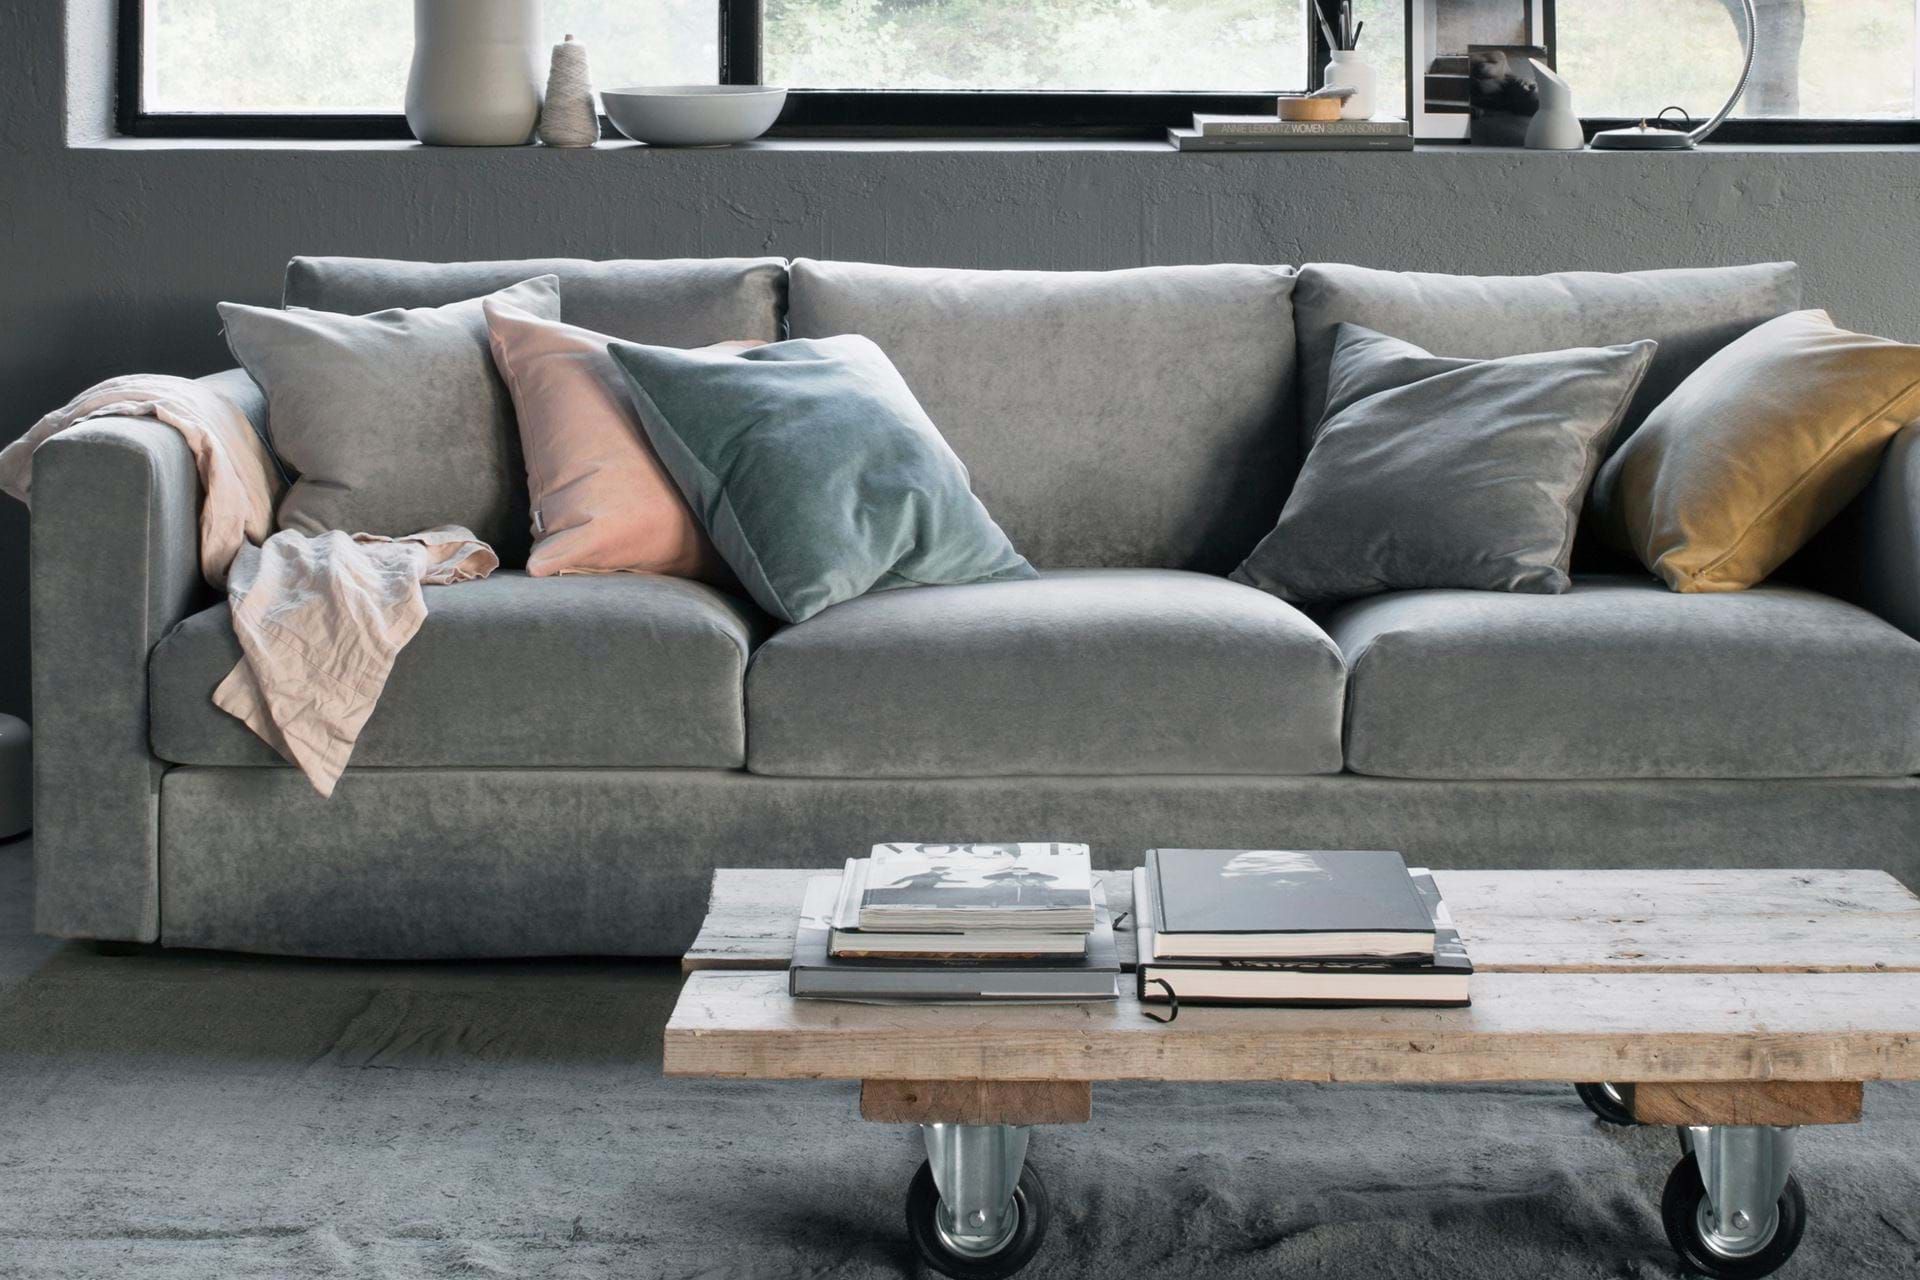 IKEA Vimle sofa review and why love it | Bemz